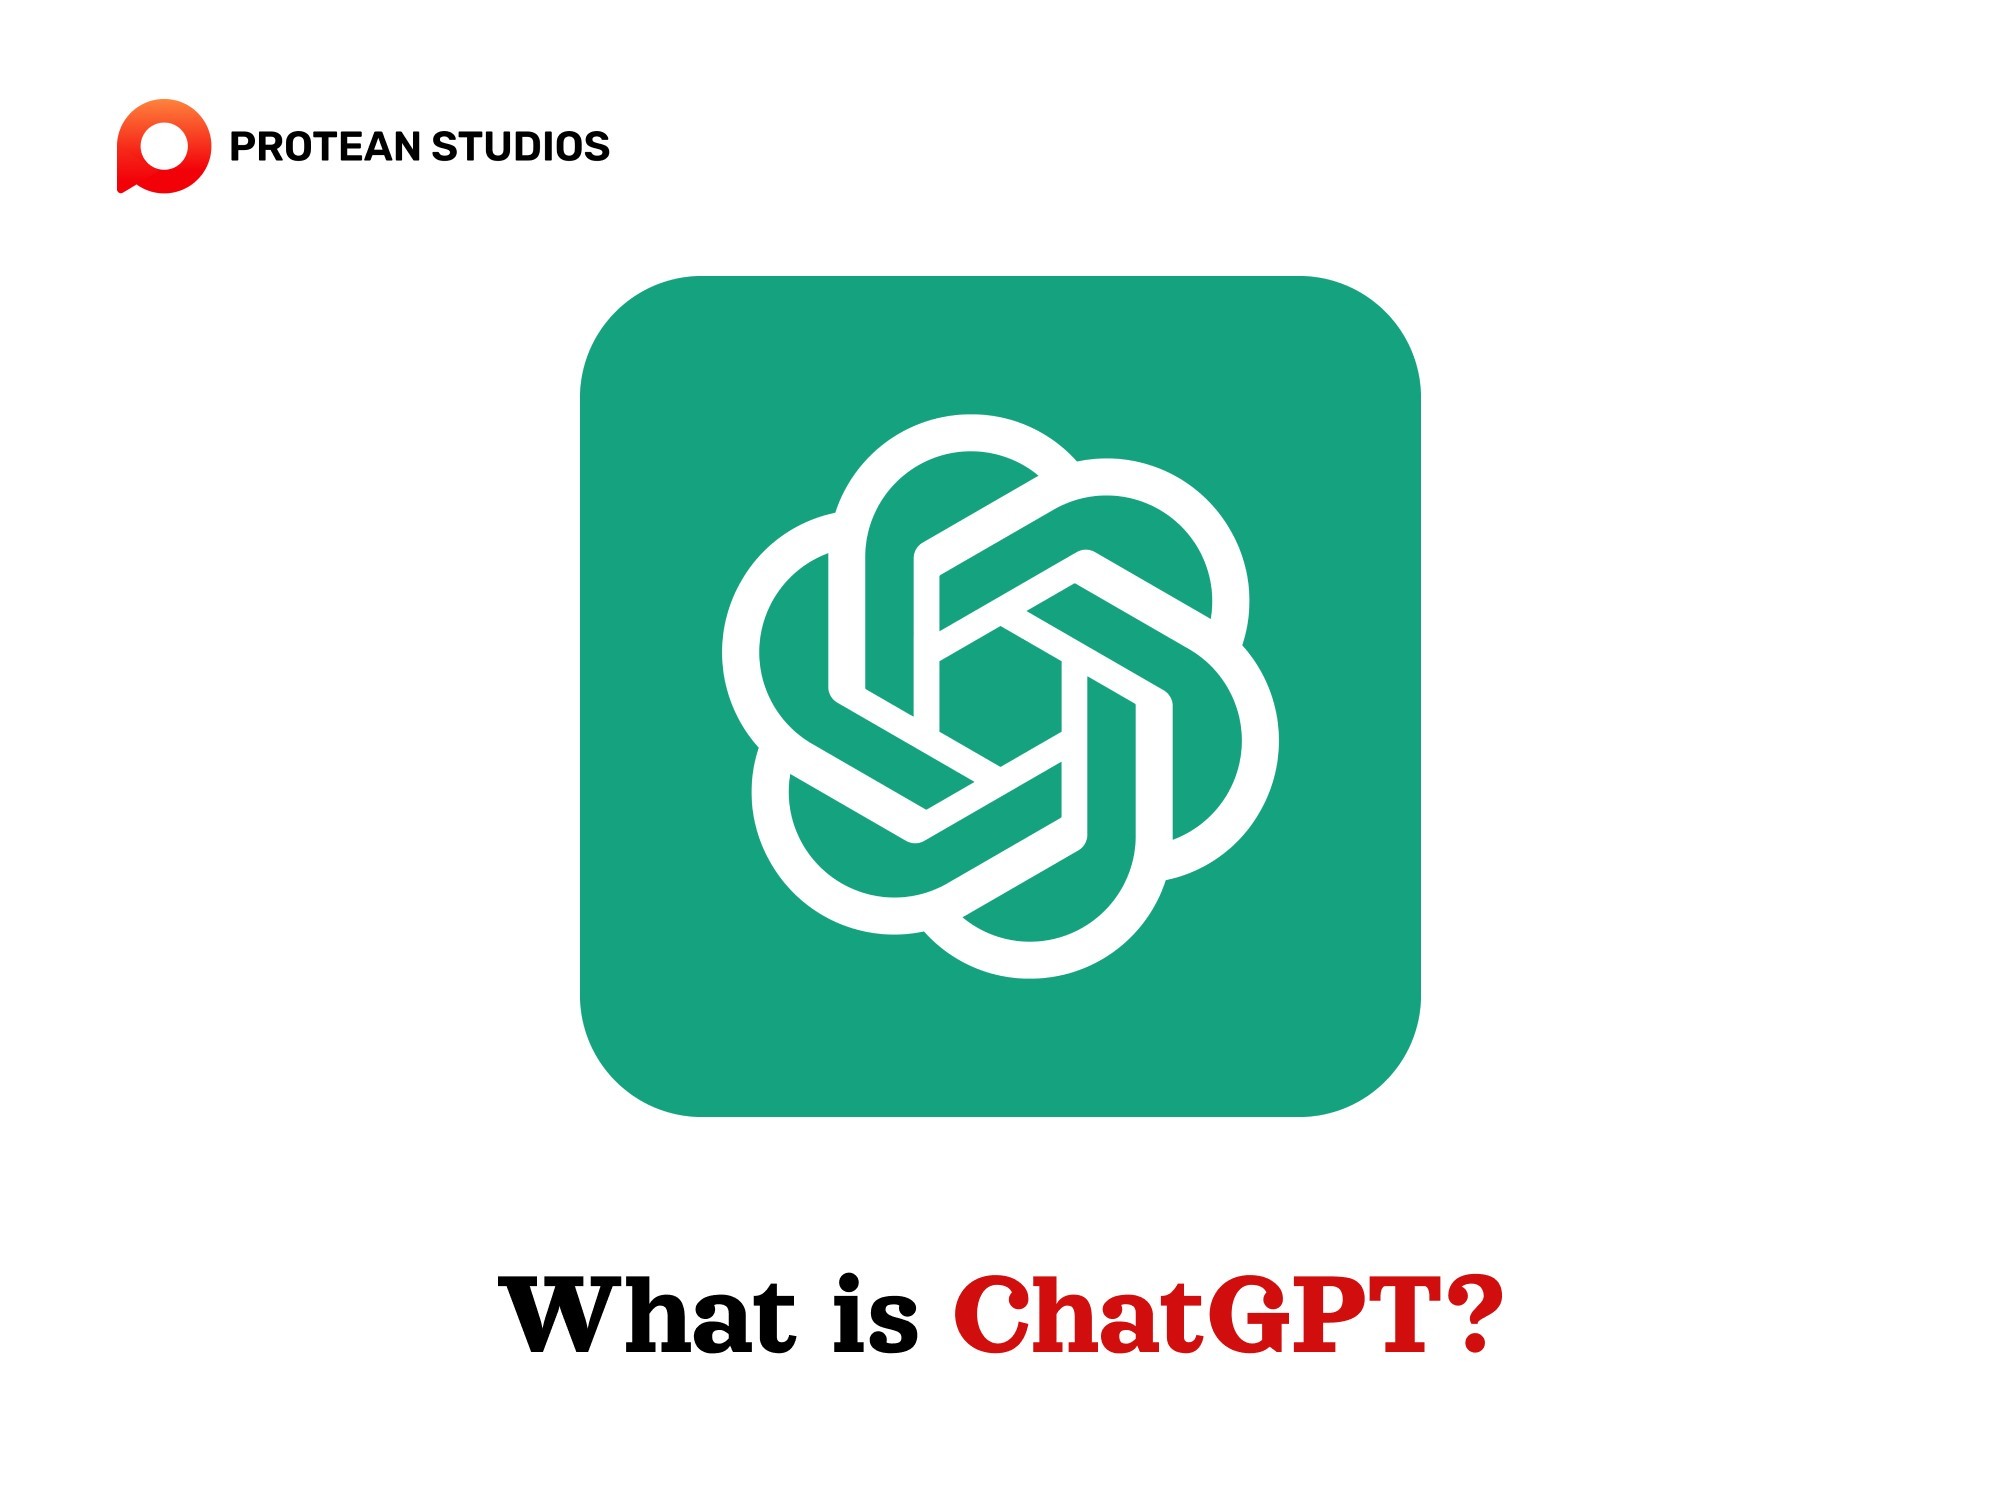 Basic information related to Chat GPT